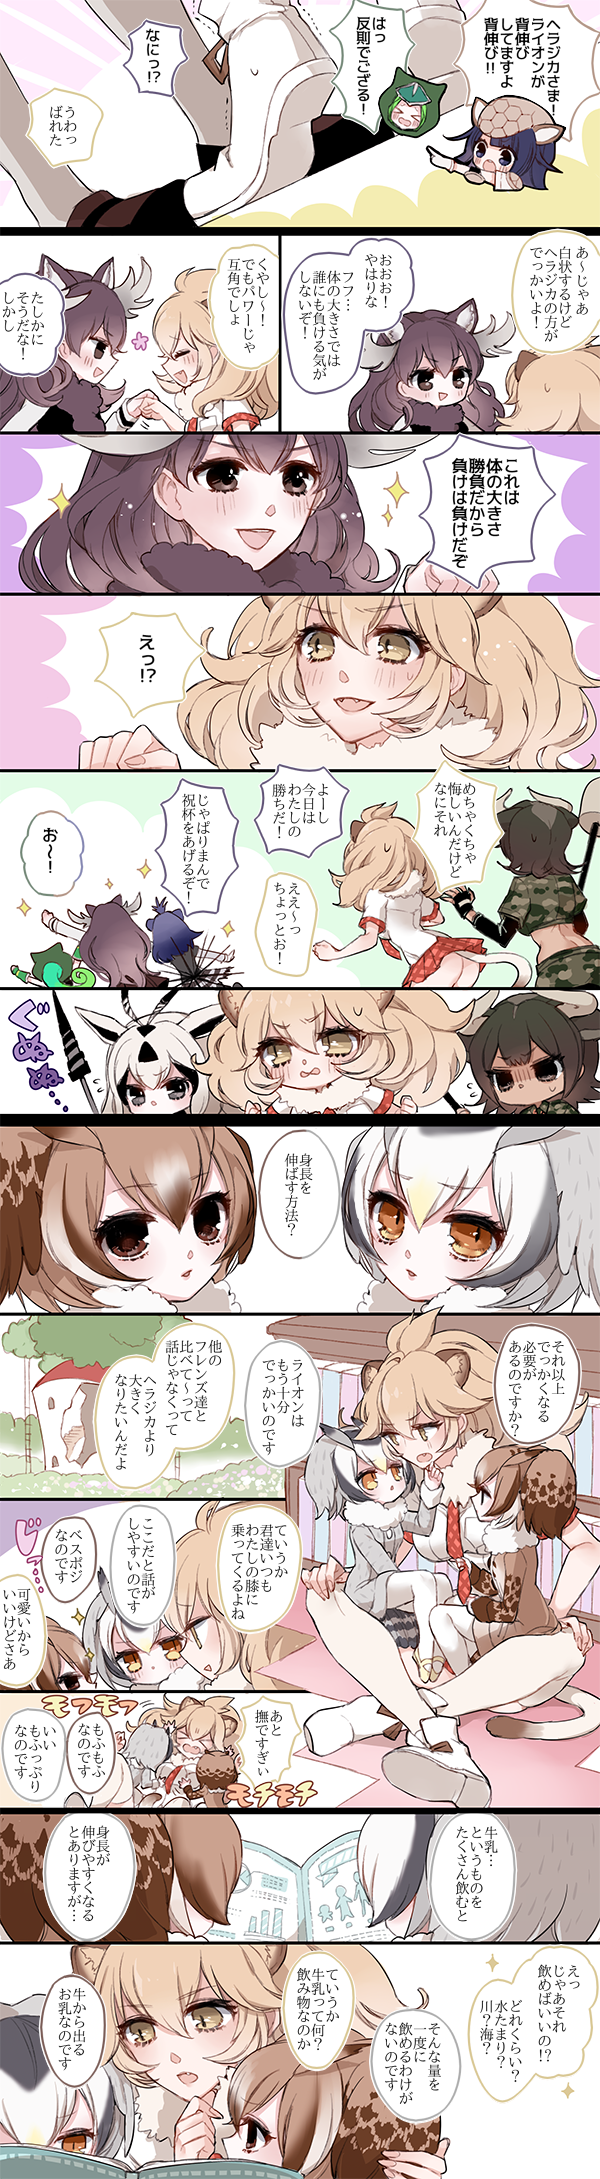 northern white-faced owl, eurasian eagle owl, lion, moose, aurochs, and 4 more (kemono friends) drawn by mamaloni